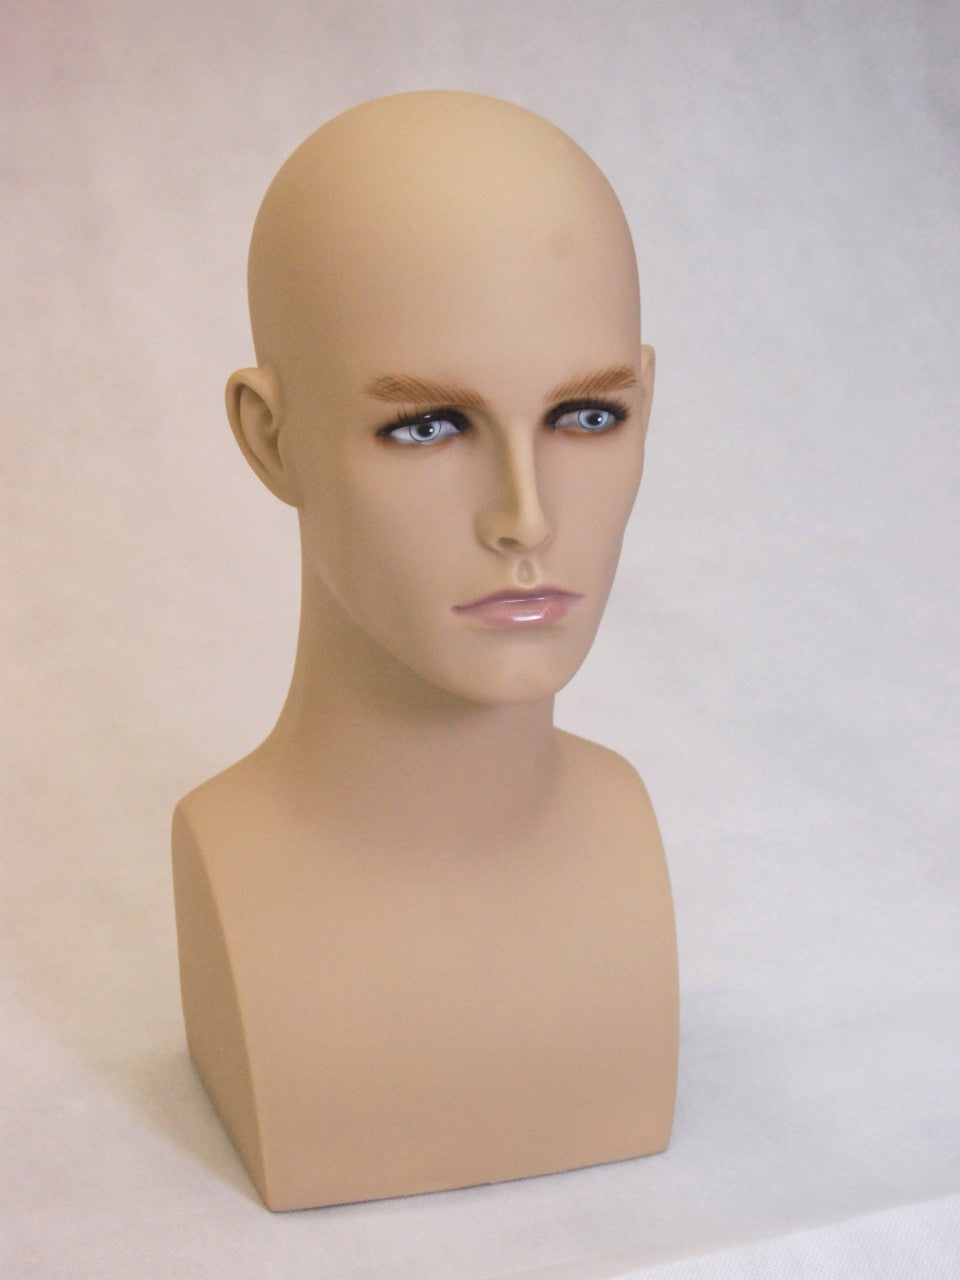 Art: Male Mannequin Head – Mannequin Madness